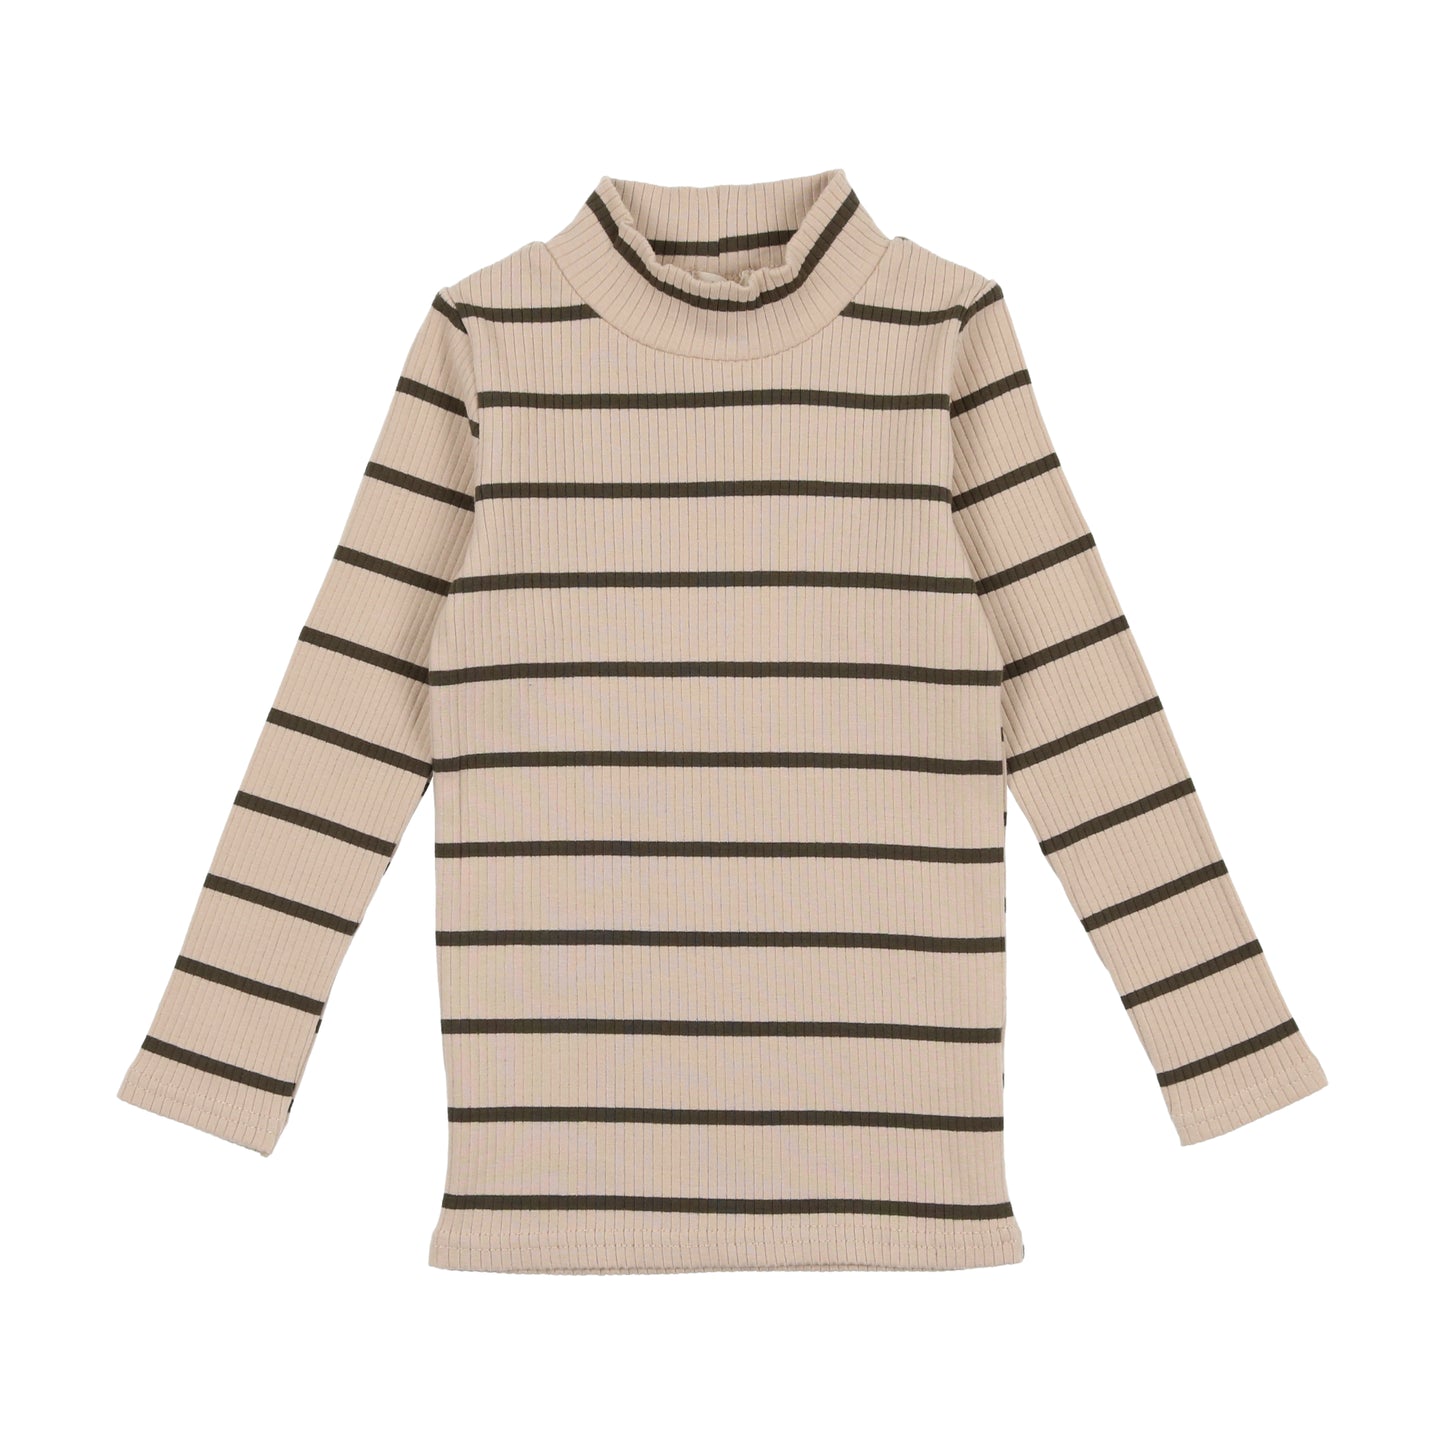 Lil Legs Ribbed/Striped Mock Neck